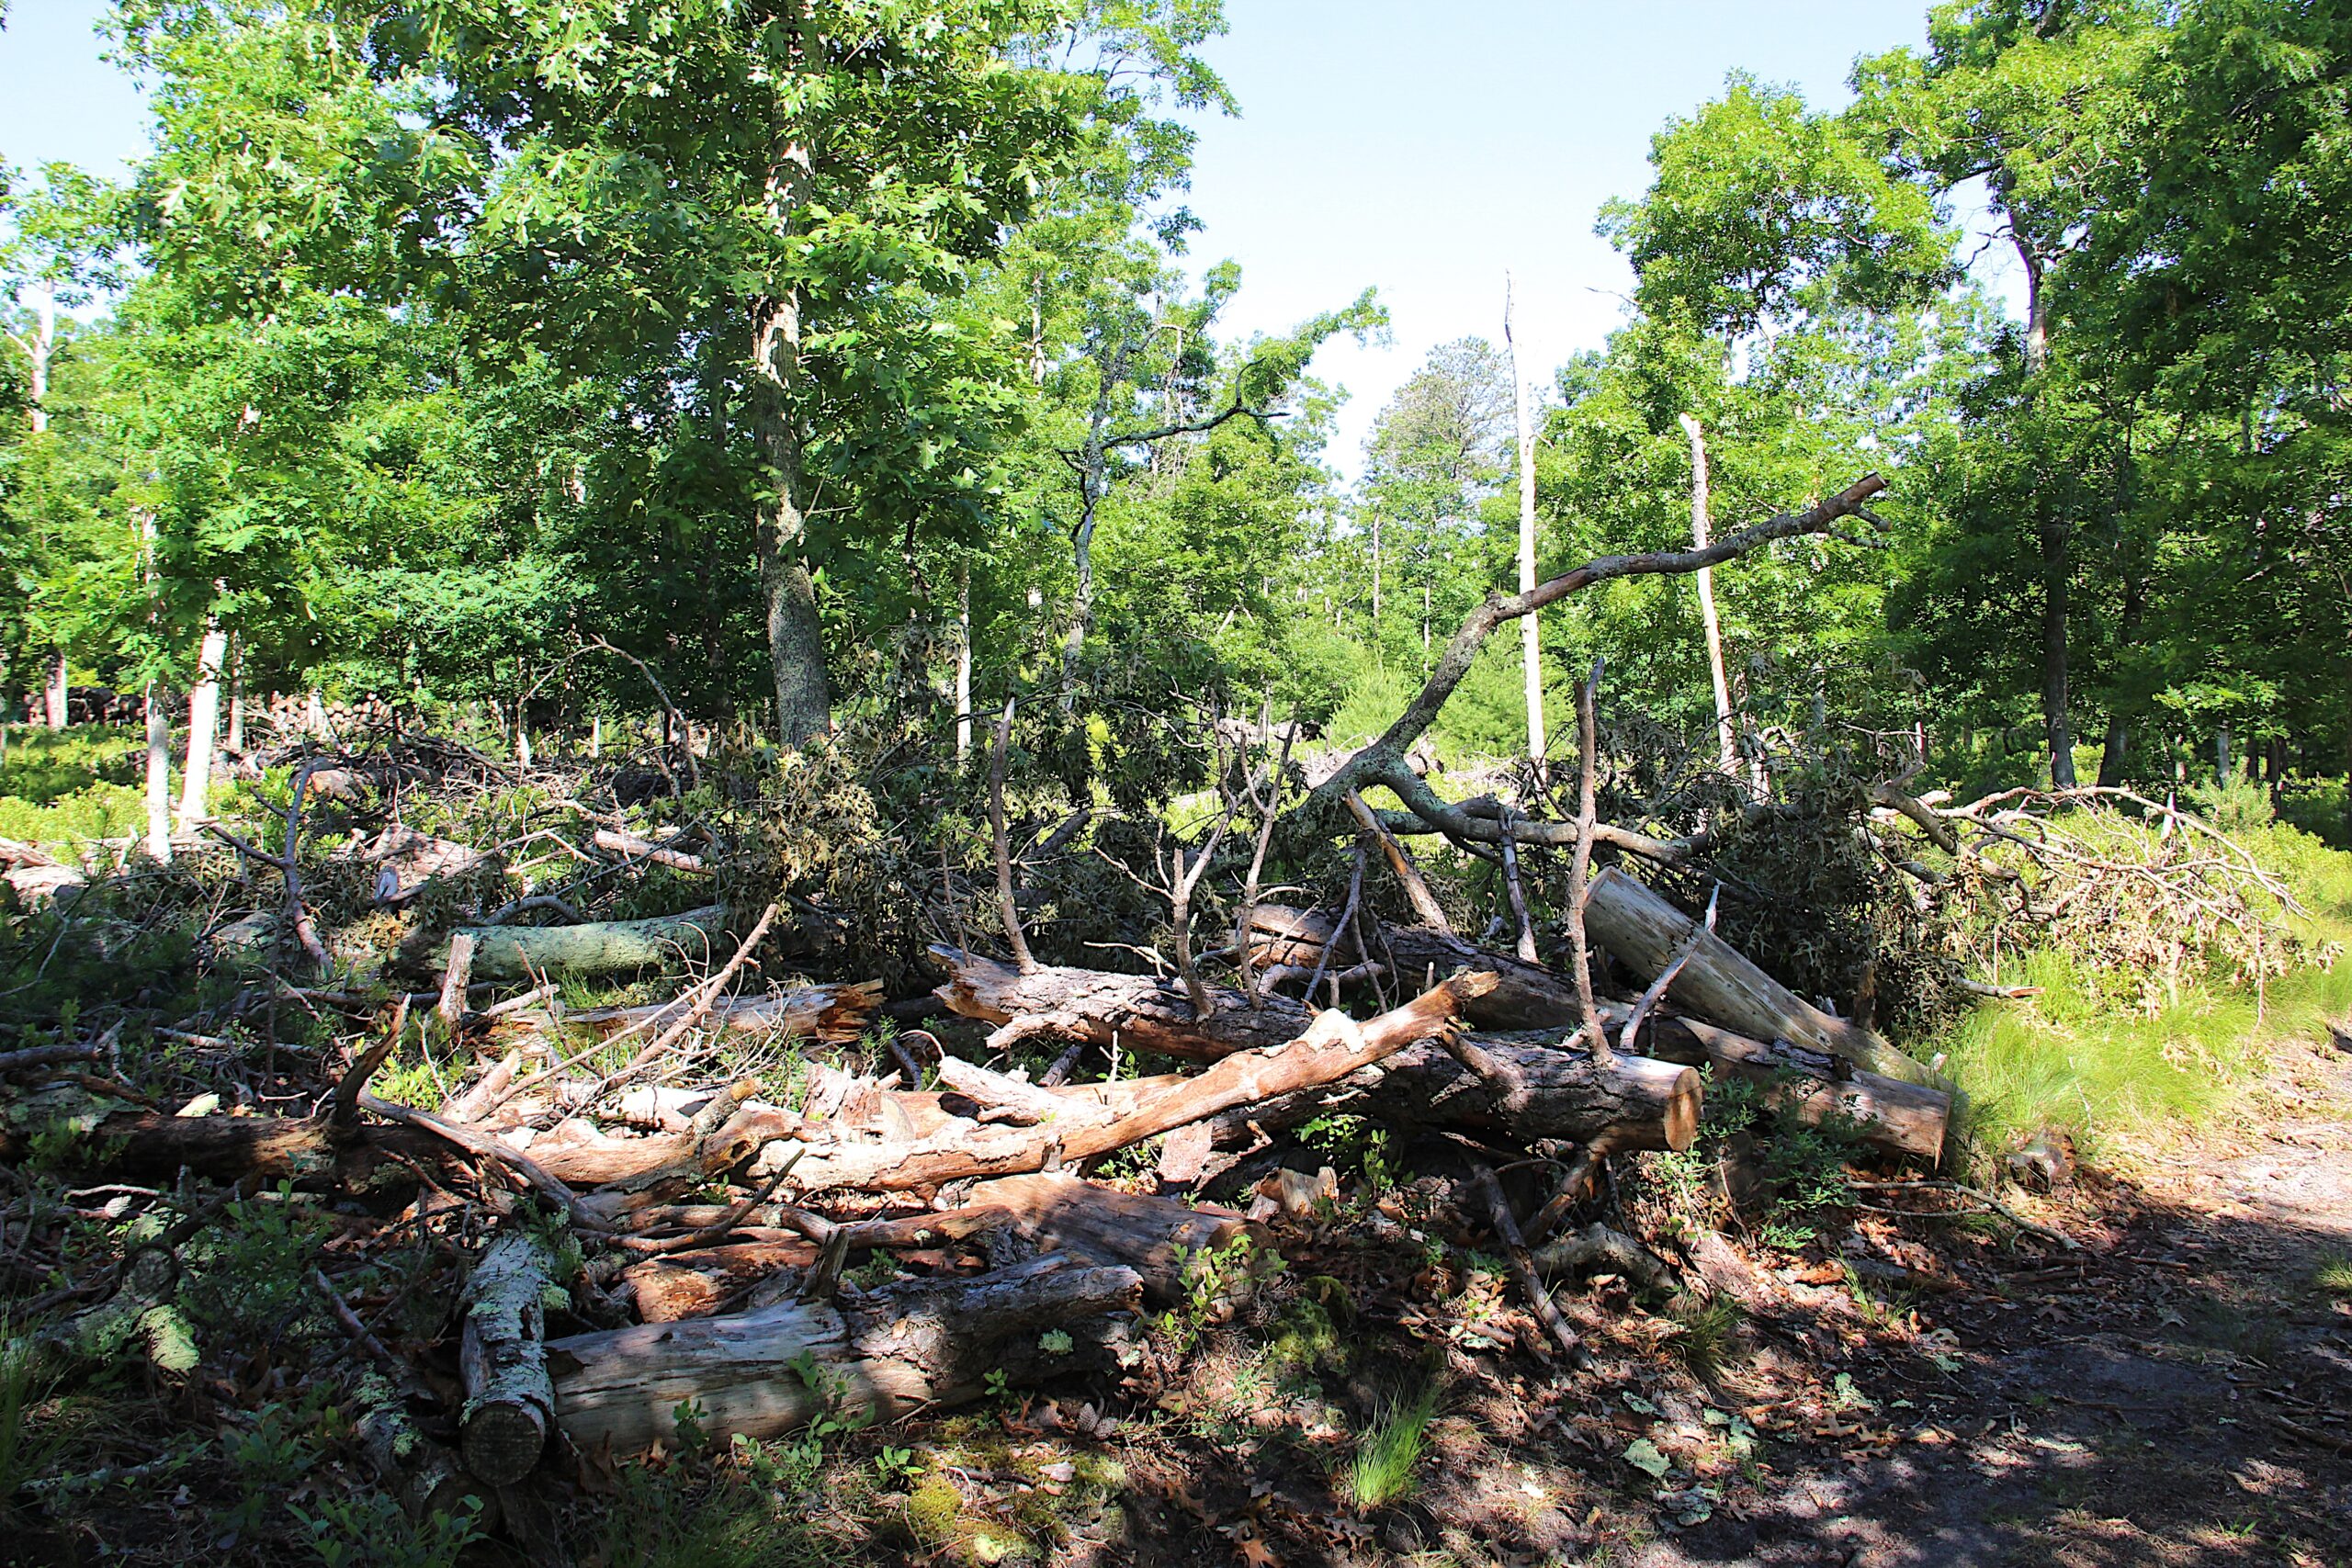 Felled trees, due to southern pine beetle infestation, near Peter Van Scoyoc's property in the Northwest Woods. KYRIL BROMLEY